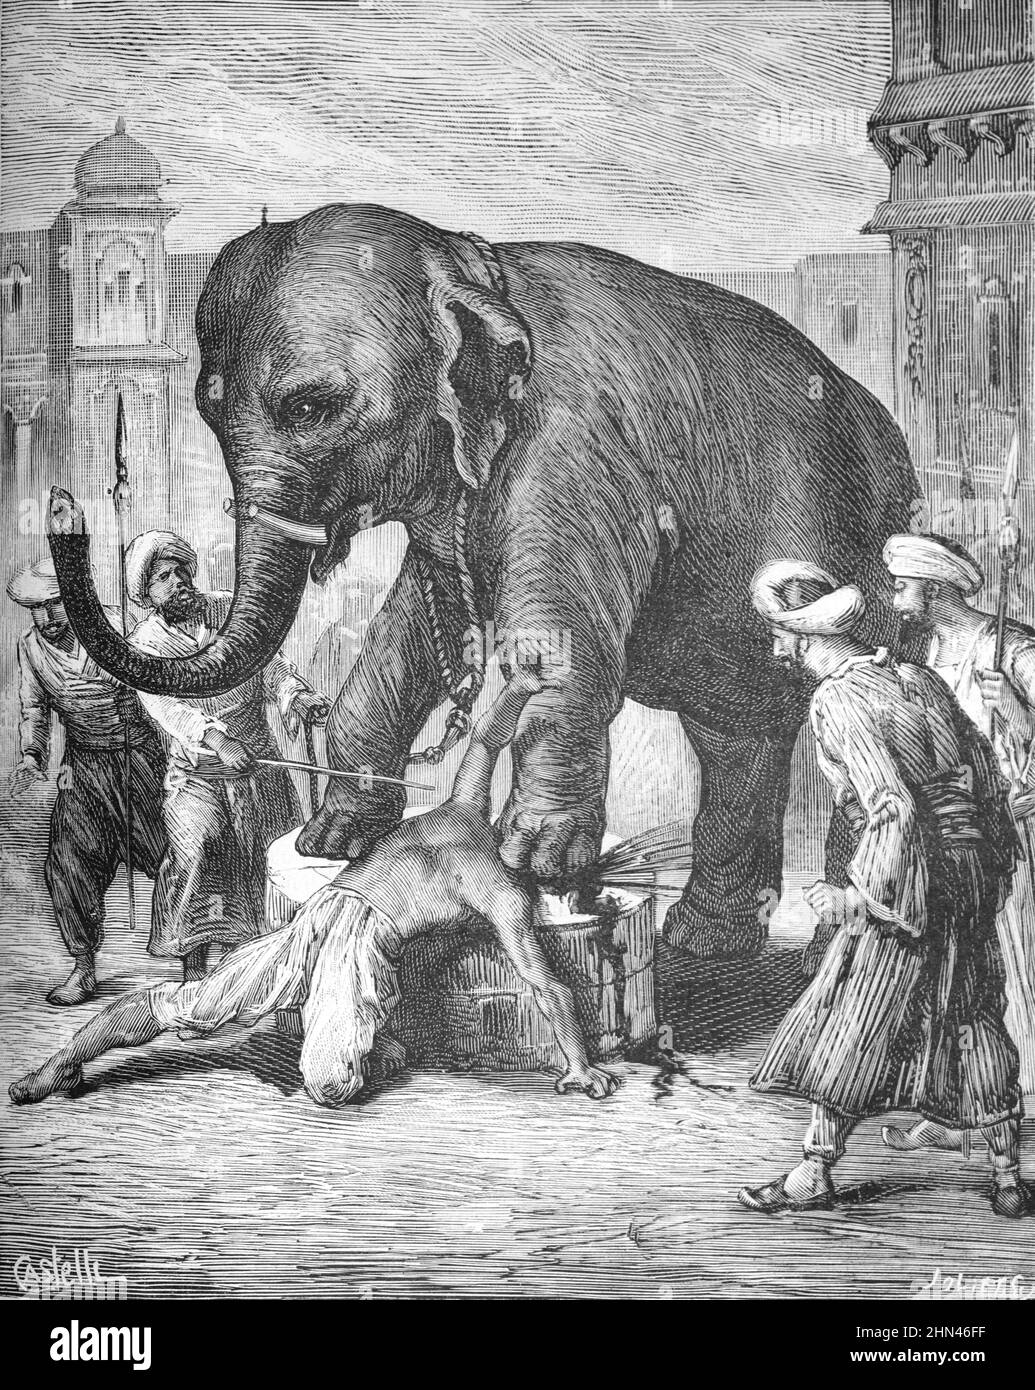 Punishment or Execution of Traitor, Death by Crushing or Crushed by Elephant in Court of Nawabs of Awadh Lucknow India. Vintage Illustration or Engraving 1881 (Castelli-Joliet) Stock Photo